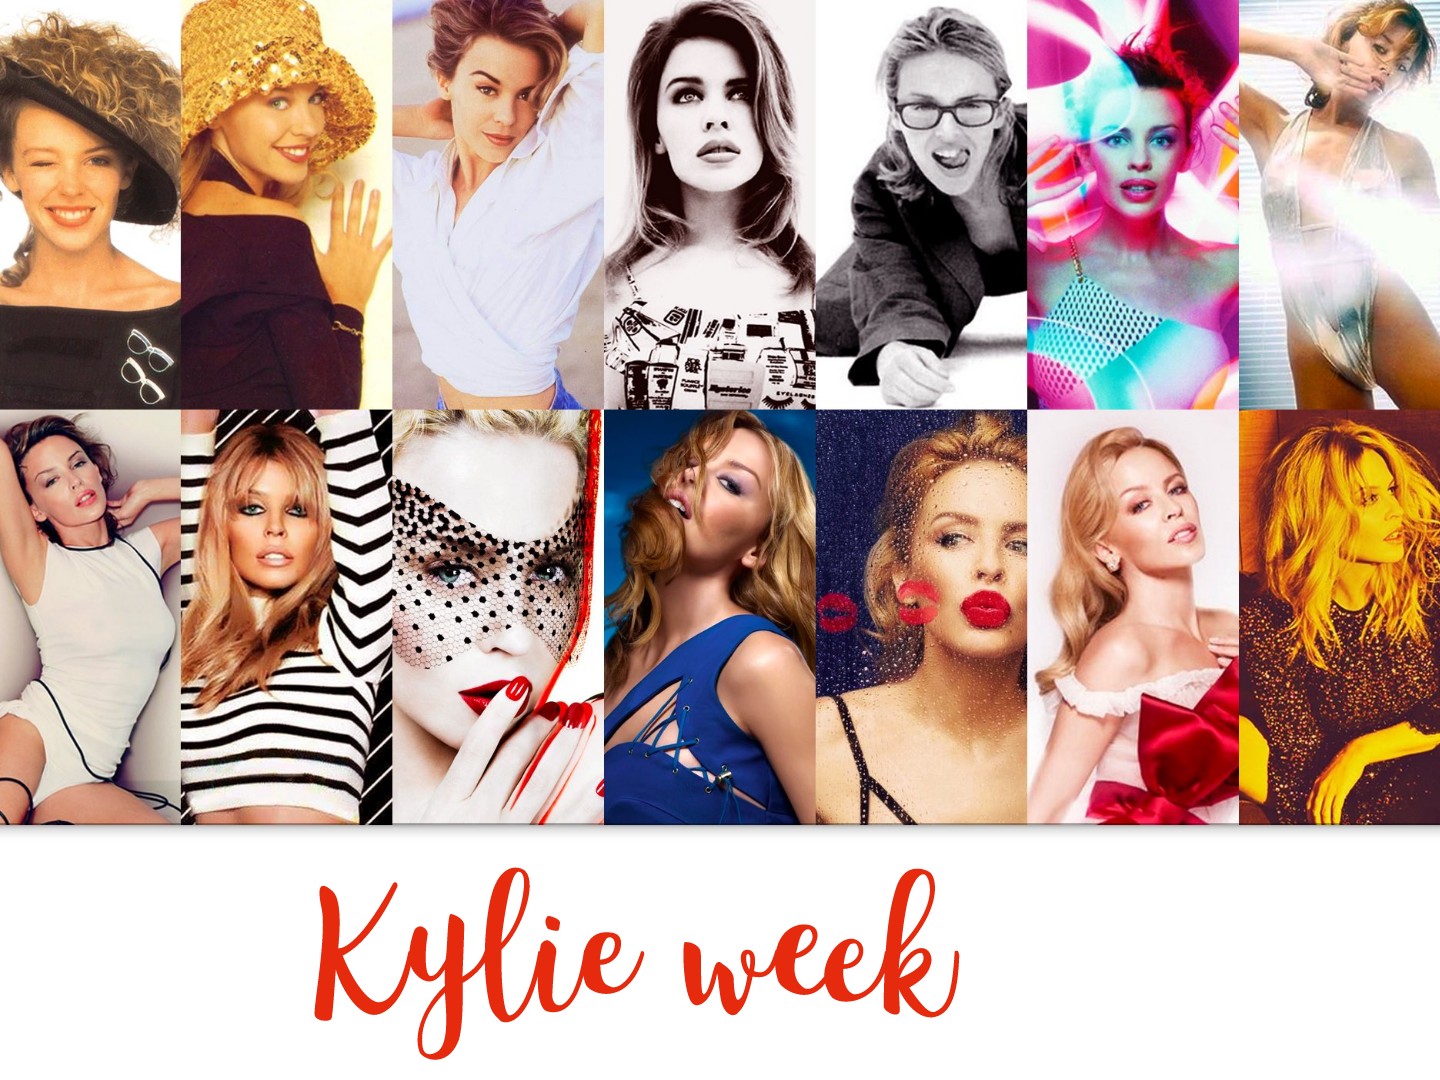 NEWS: Announcing God Is In The TV's Kylie week